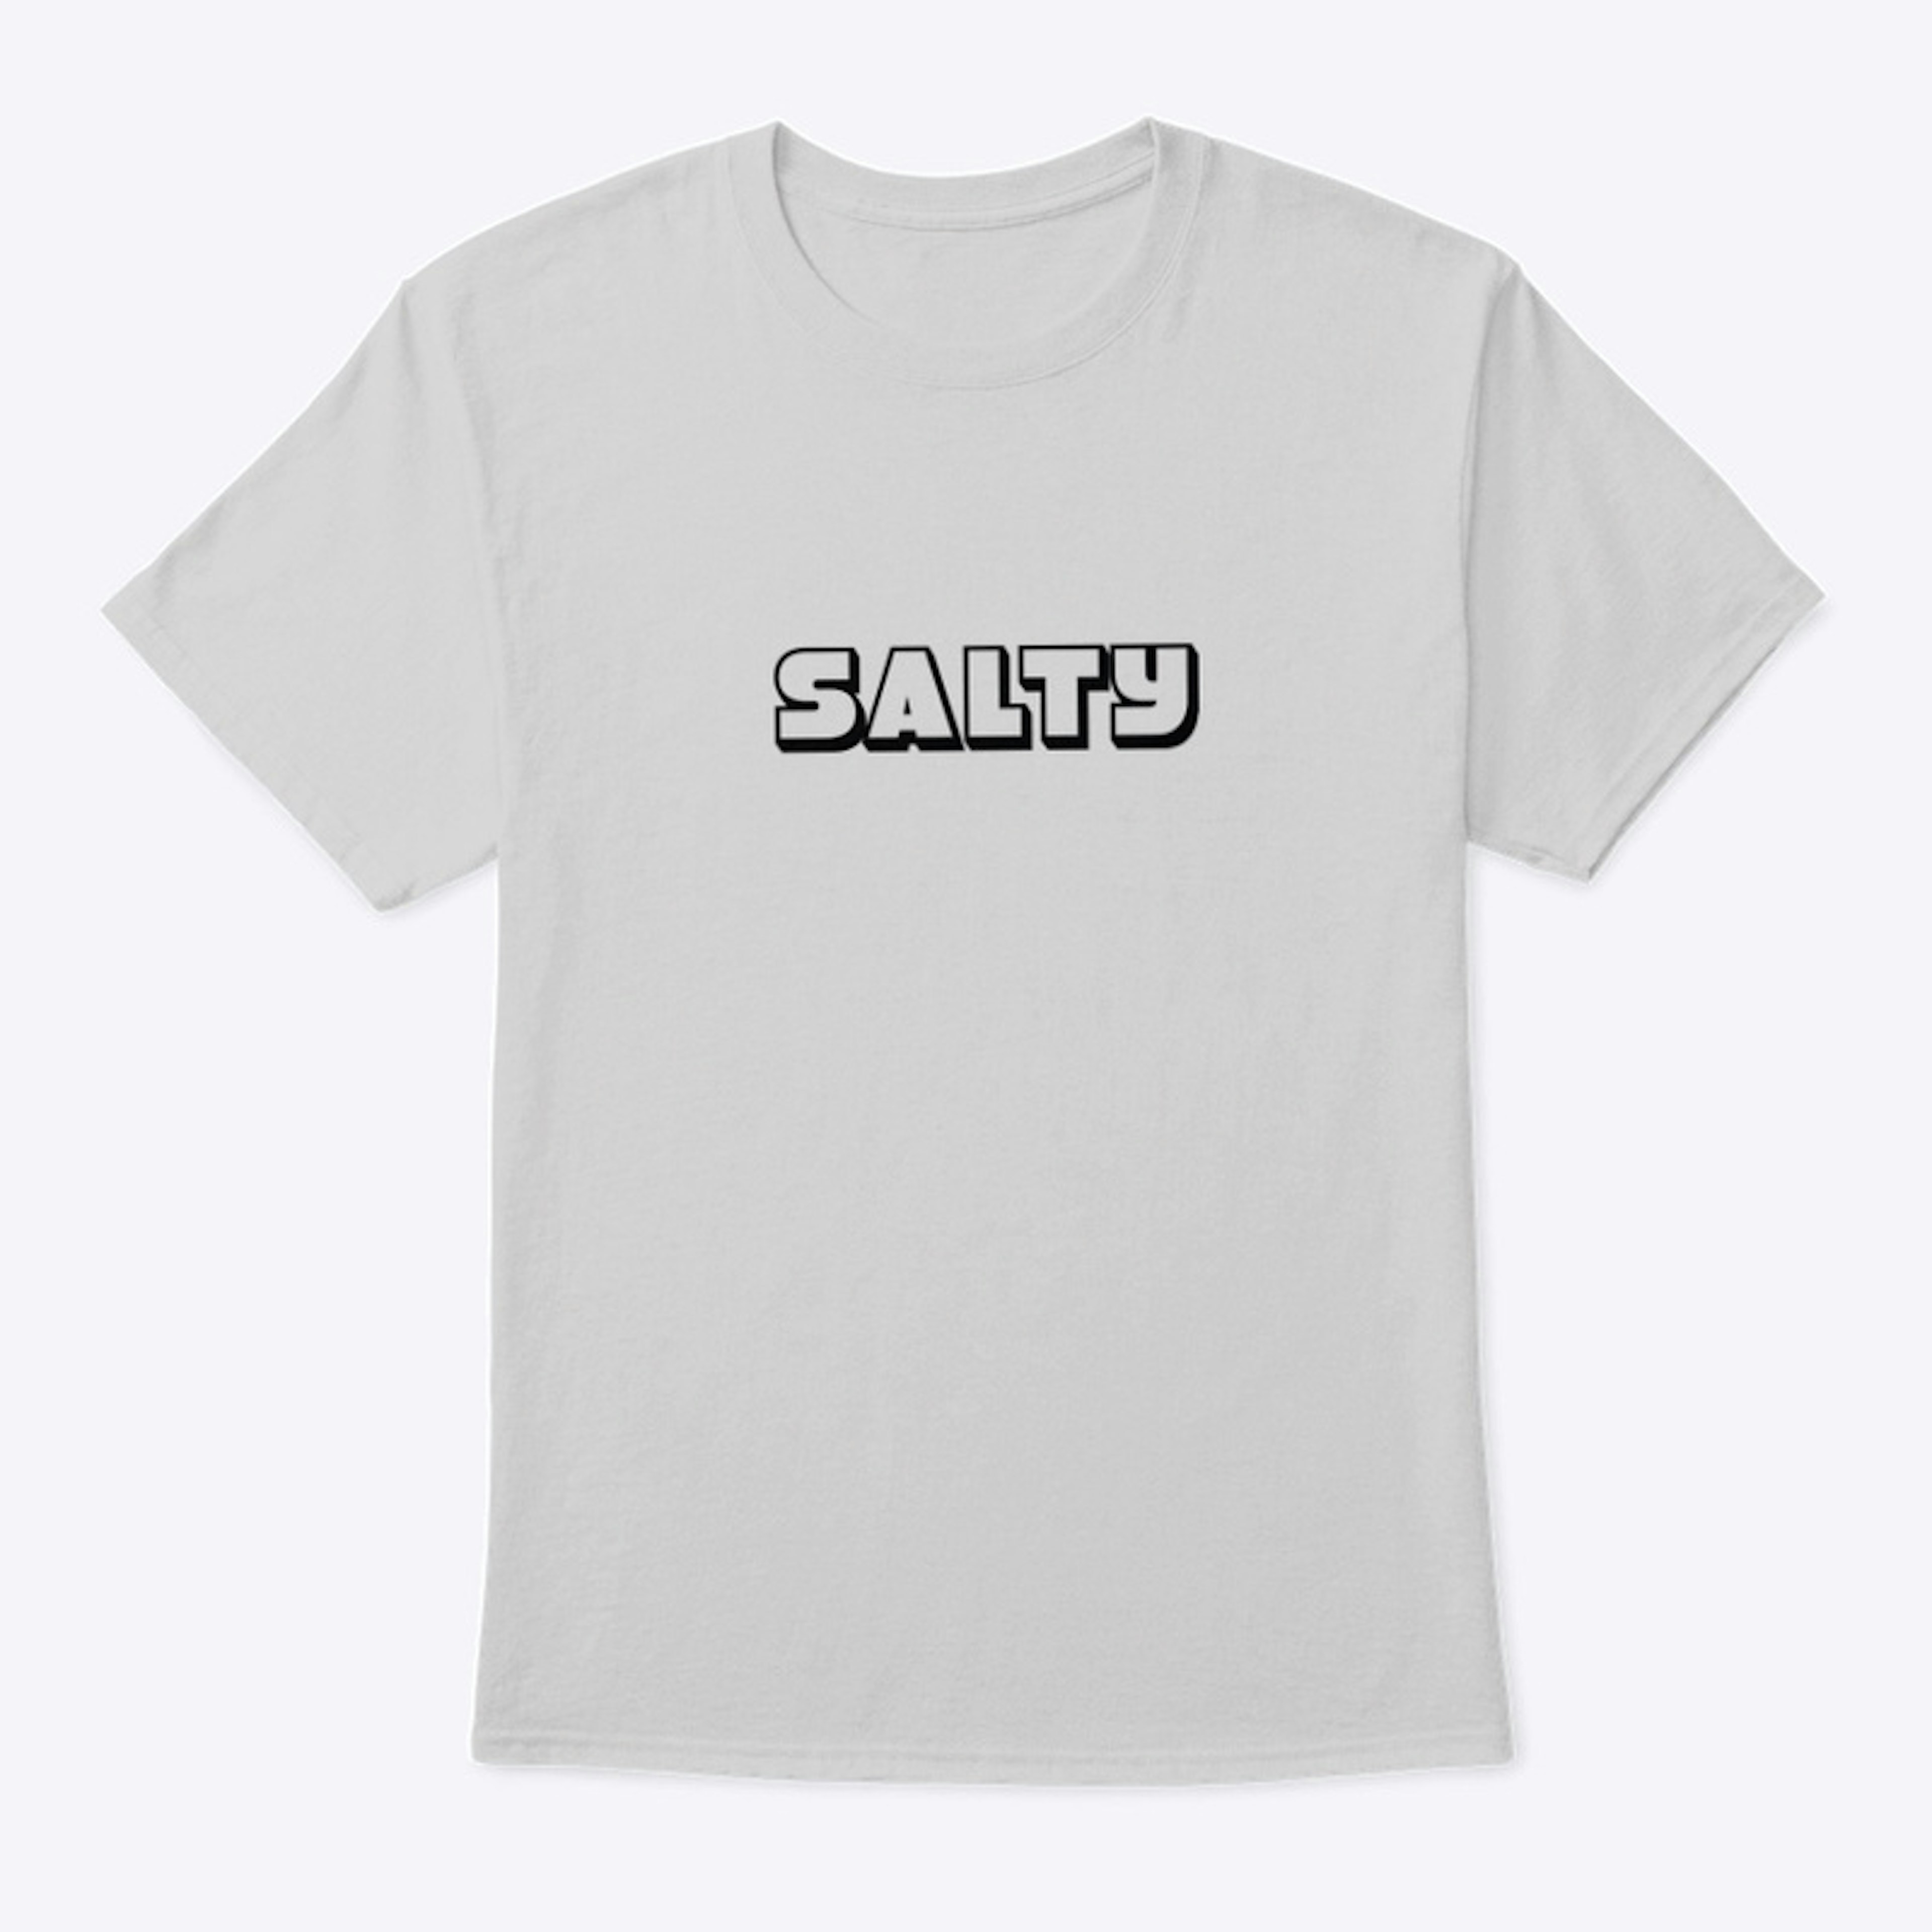 Salty Merchandise from protocooks